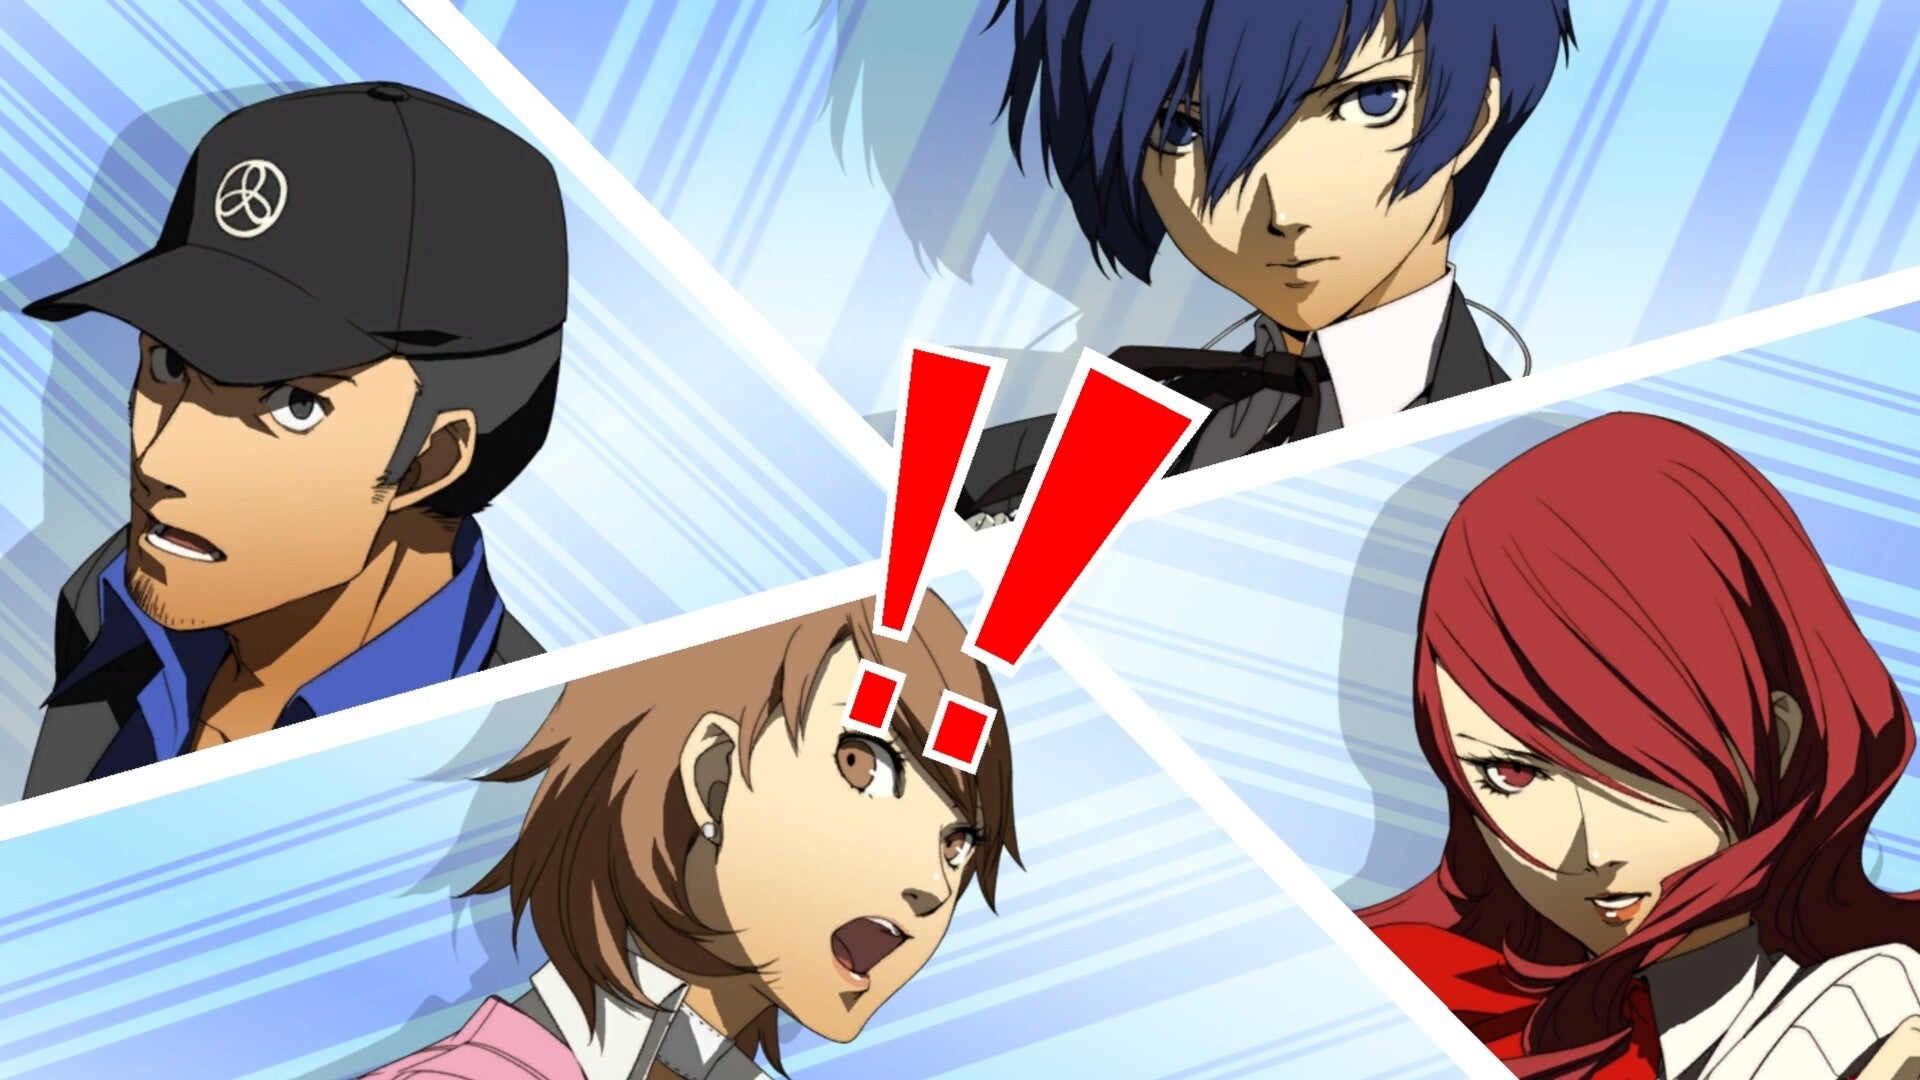 A four-way grid of a Persona 3 party about to engage in an all-out attack.